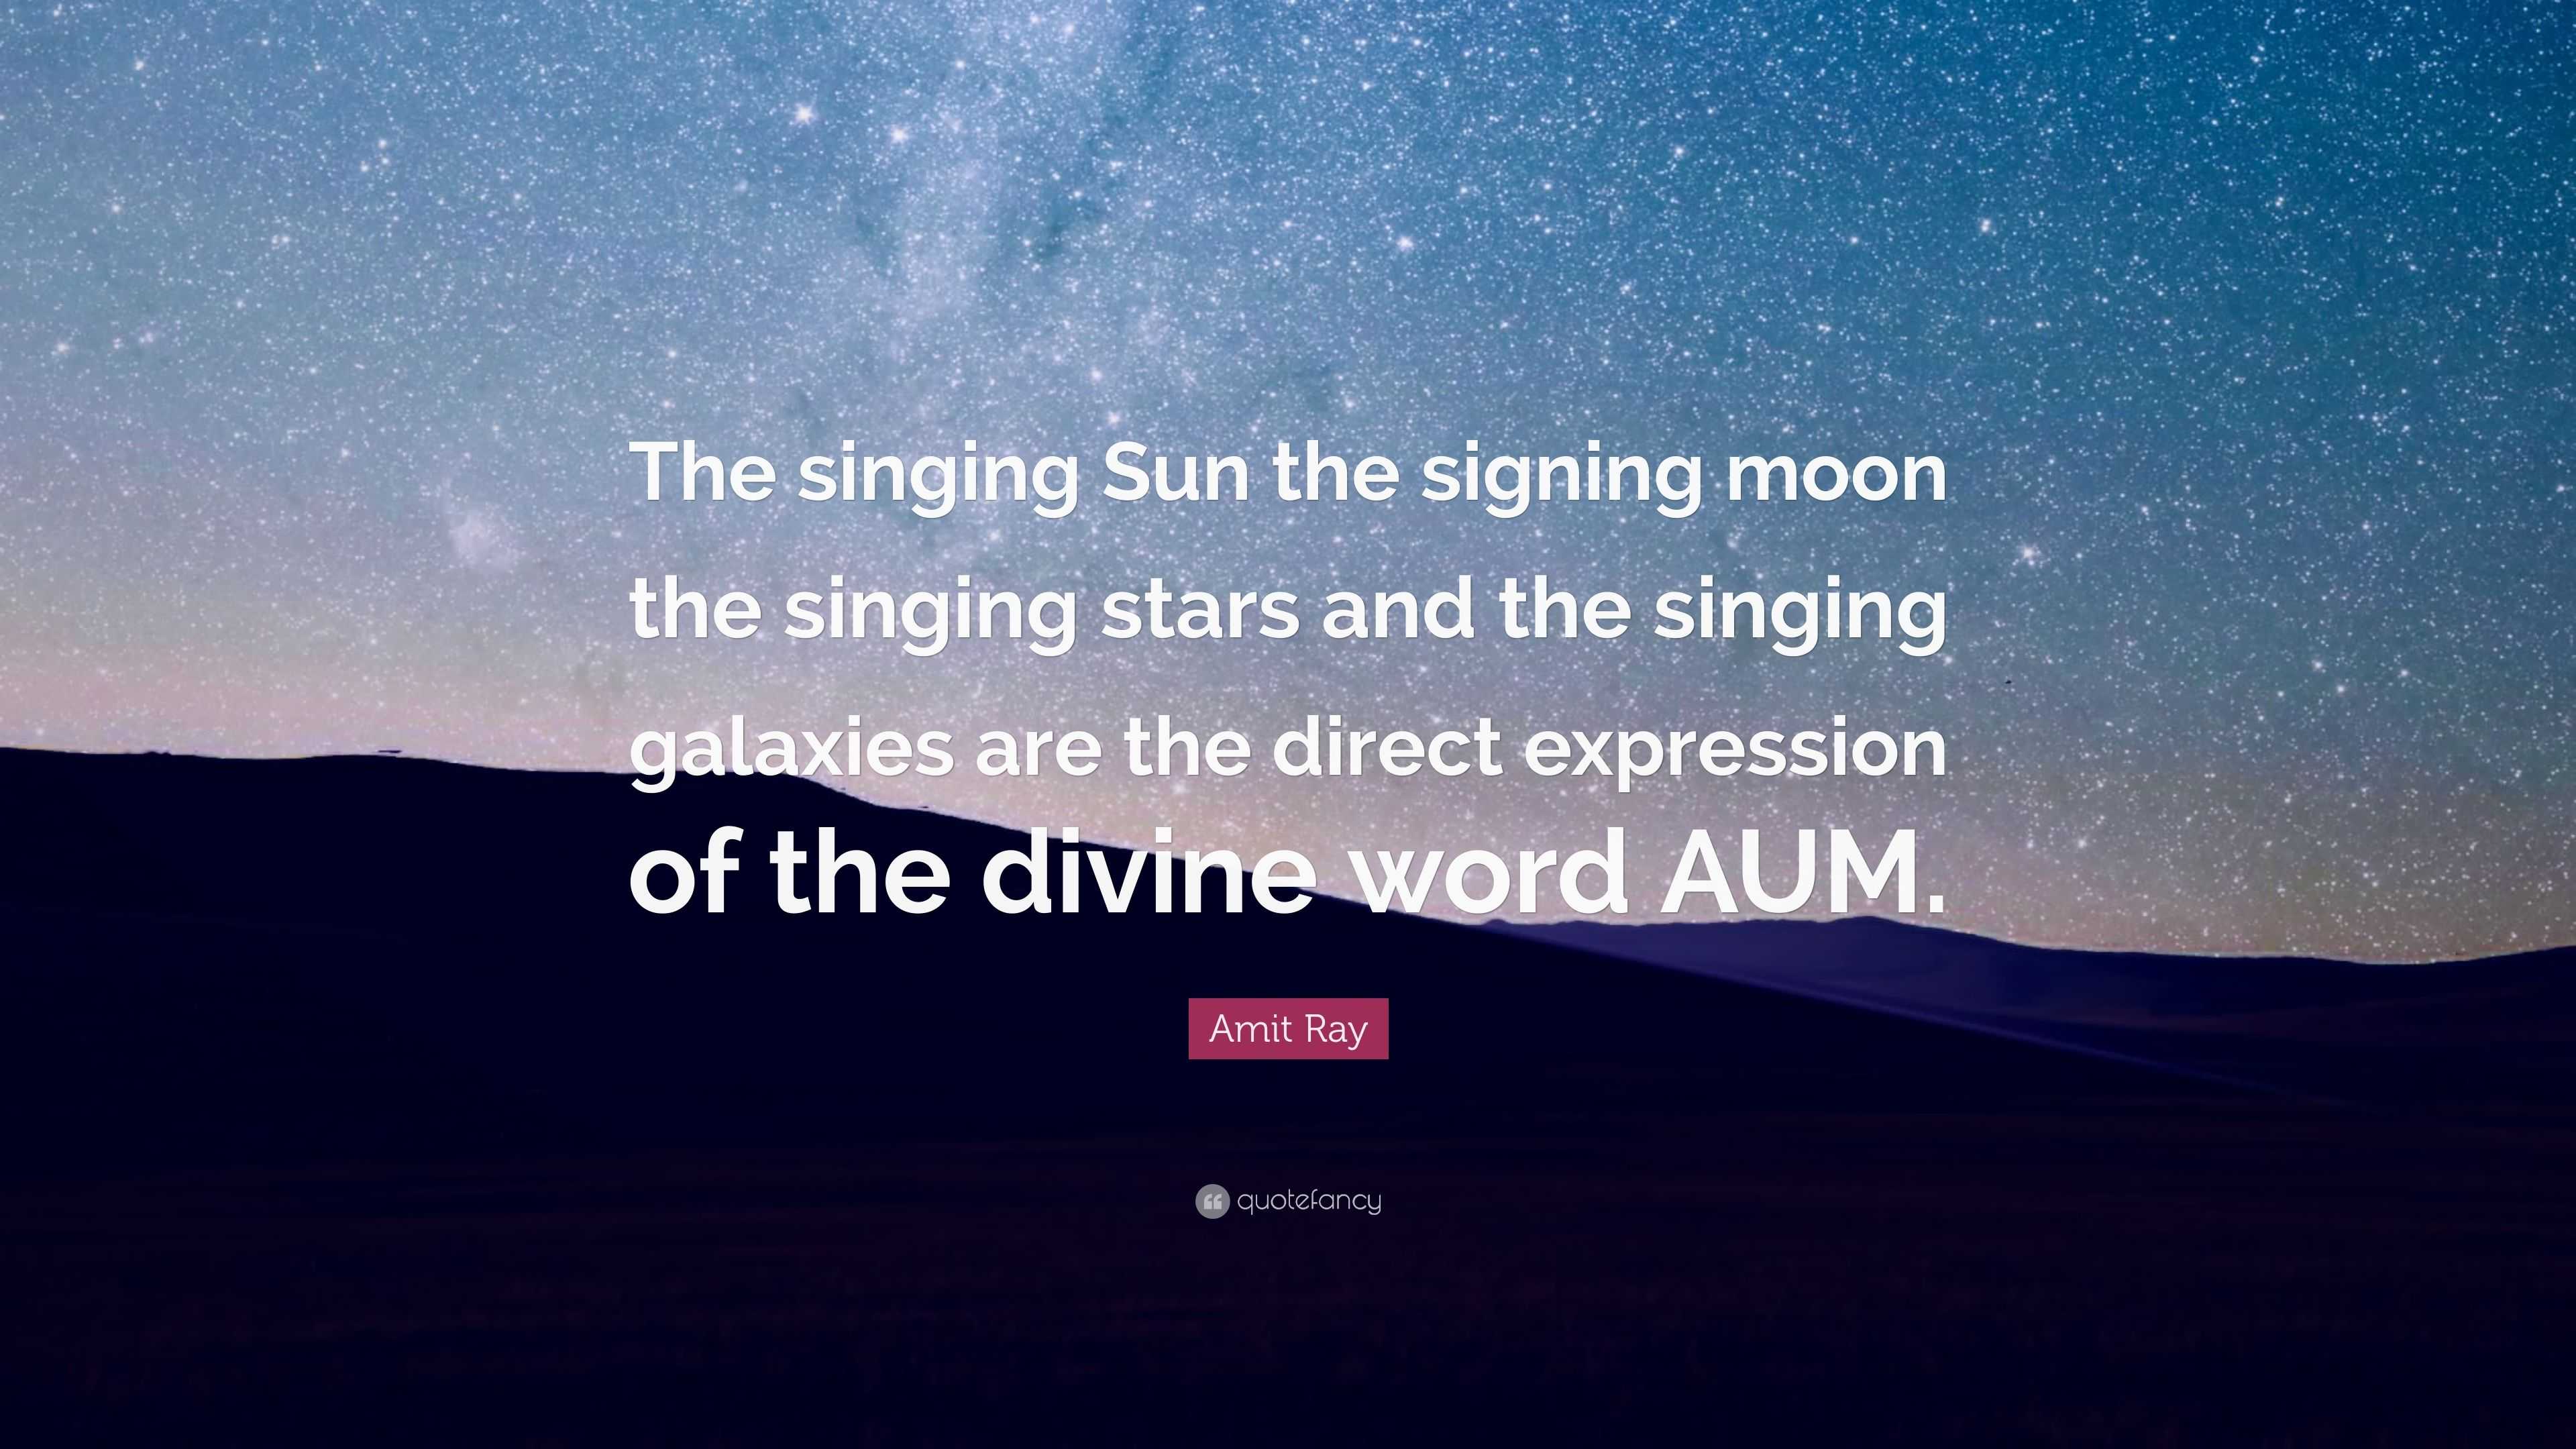 Amit Ray Quote “The singing Sun the signing moon the singing stars and